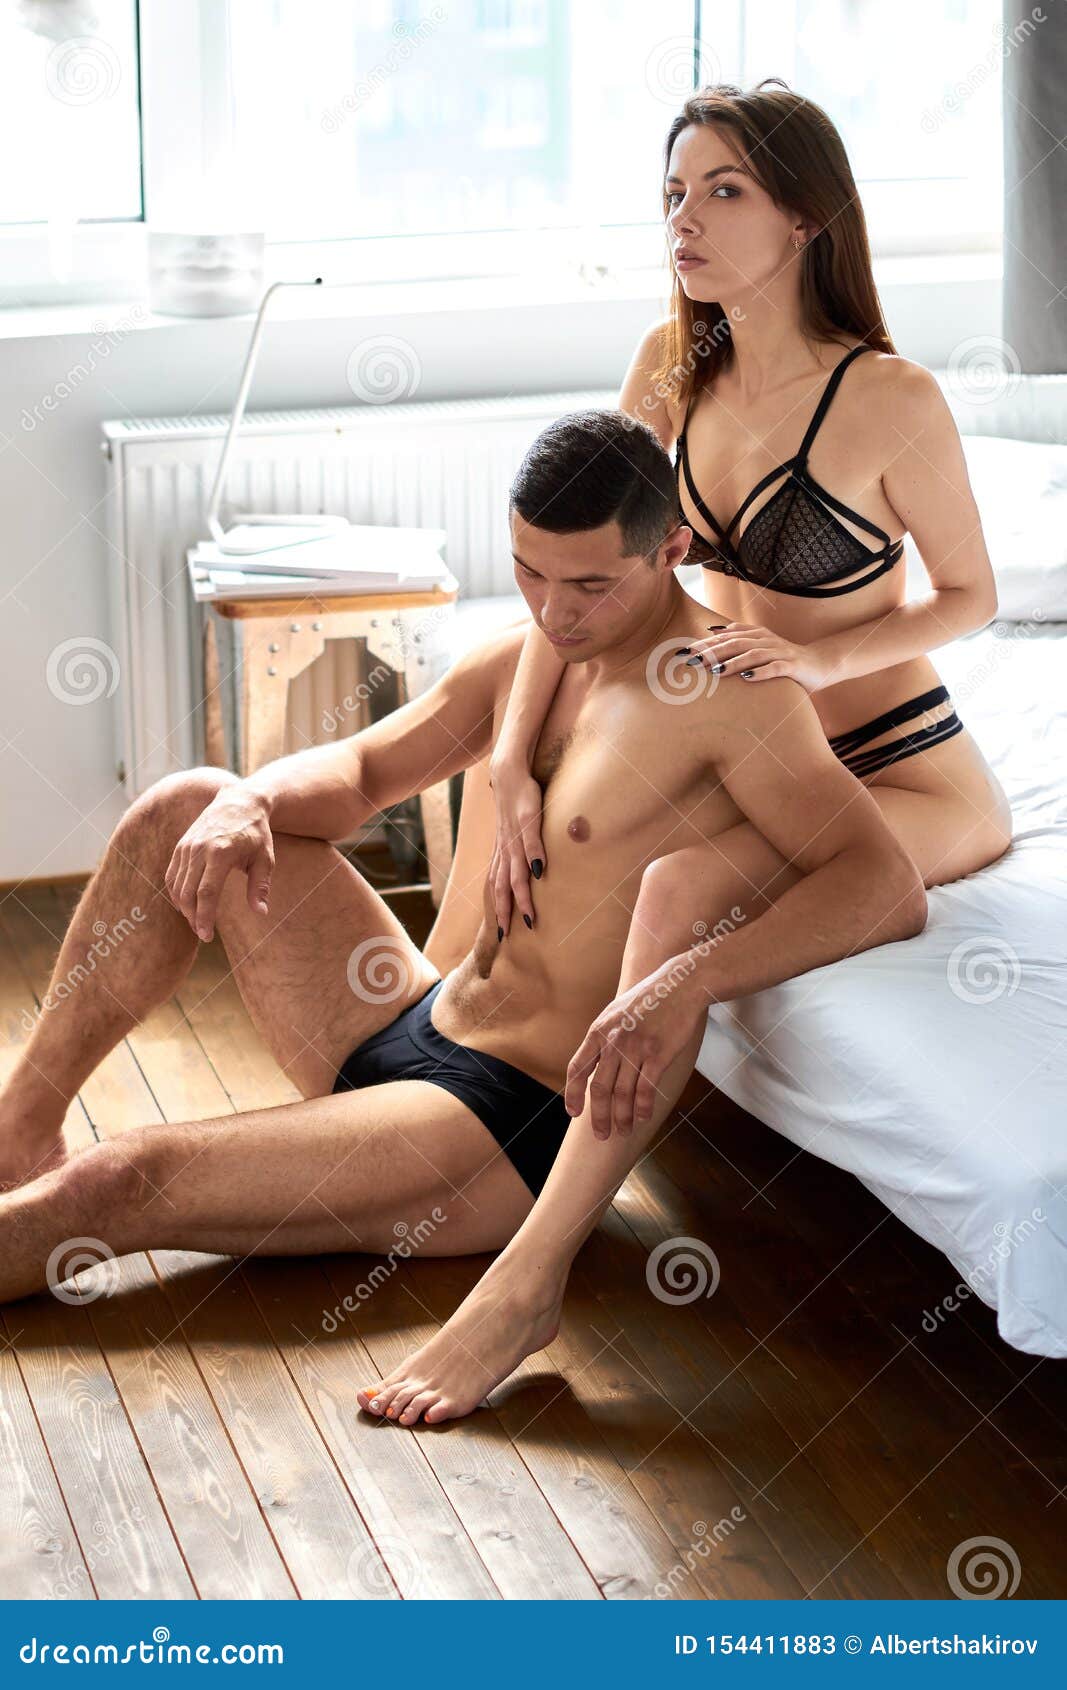 https://thumbs.dreamstime.com/z/sexy-woman-stylish-lingerie-trying-to-support-her-husband-as-has-problems-sexy-women-stylish-lingerie-trying-to-support-154411883.jpg